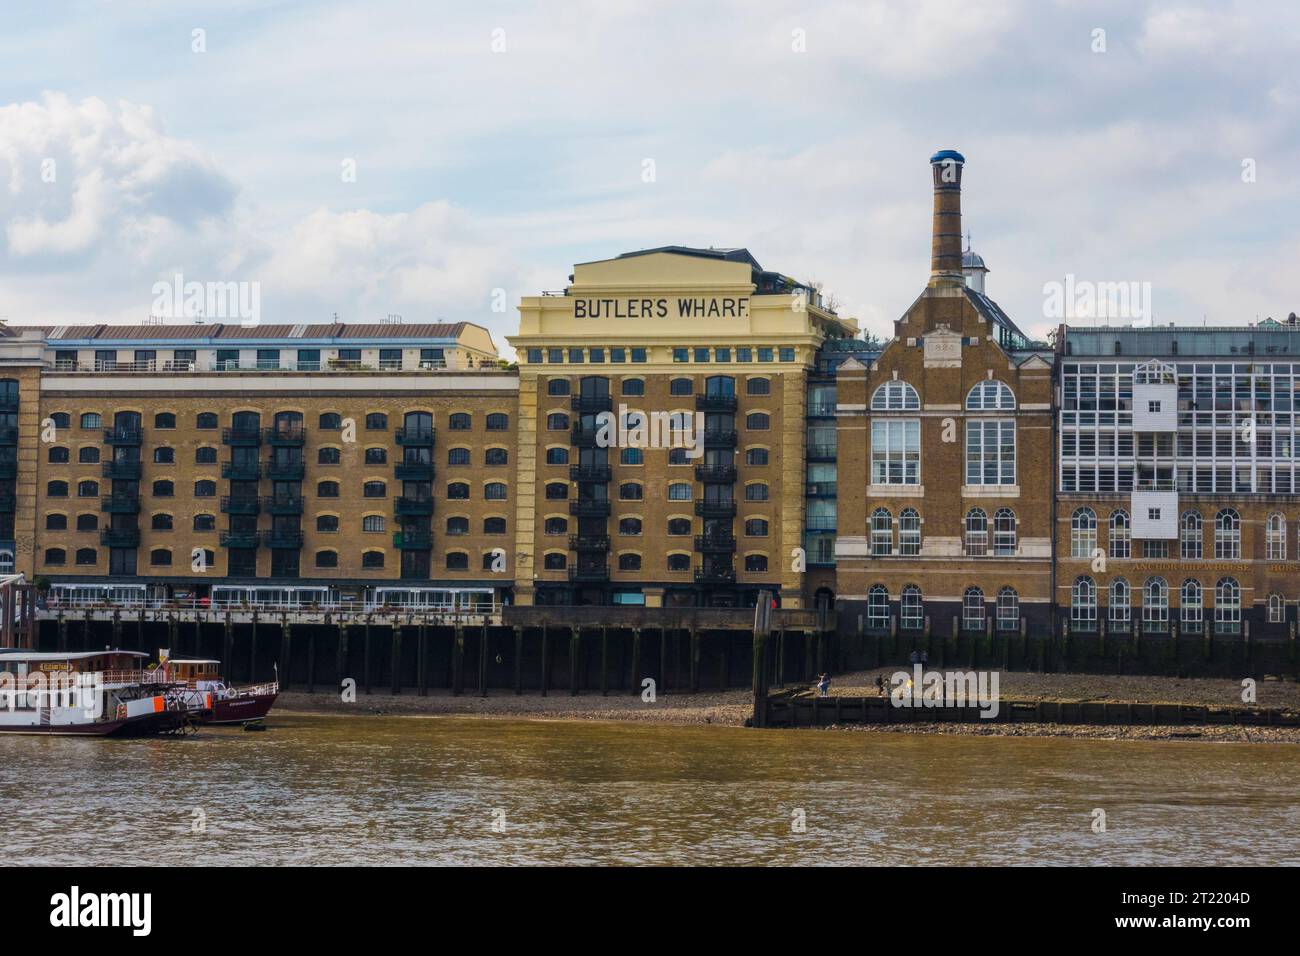 Buildings on the waterfront, Butlers Wharf, Thames River, Southwark, London Stock Photo